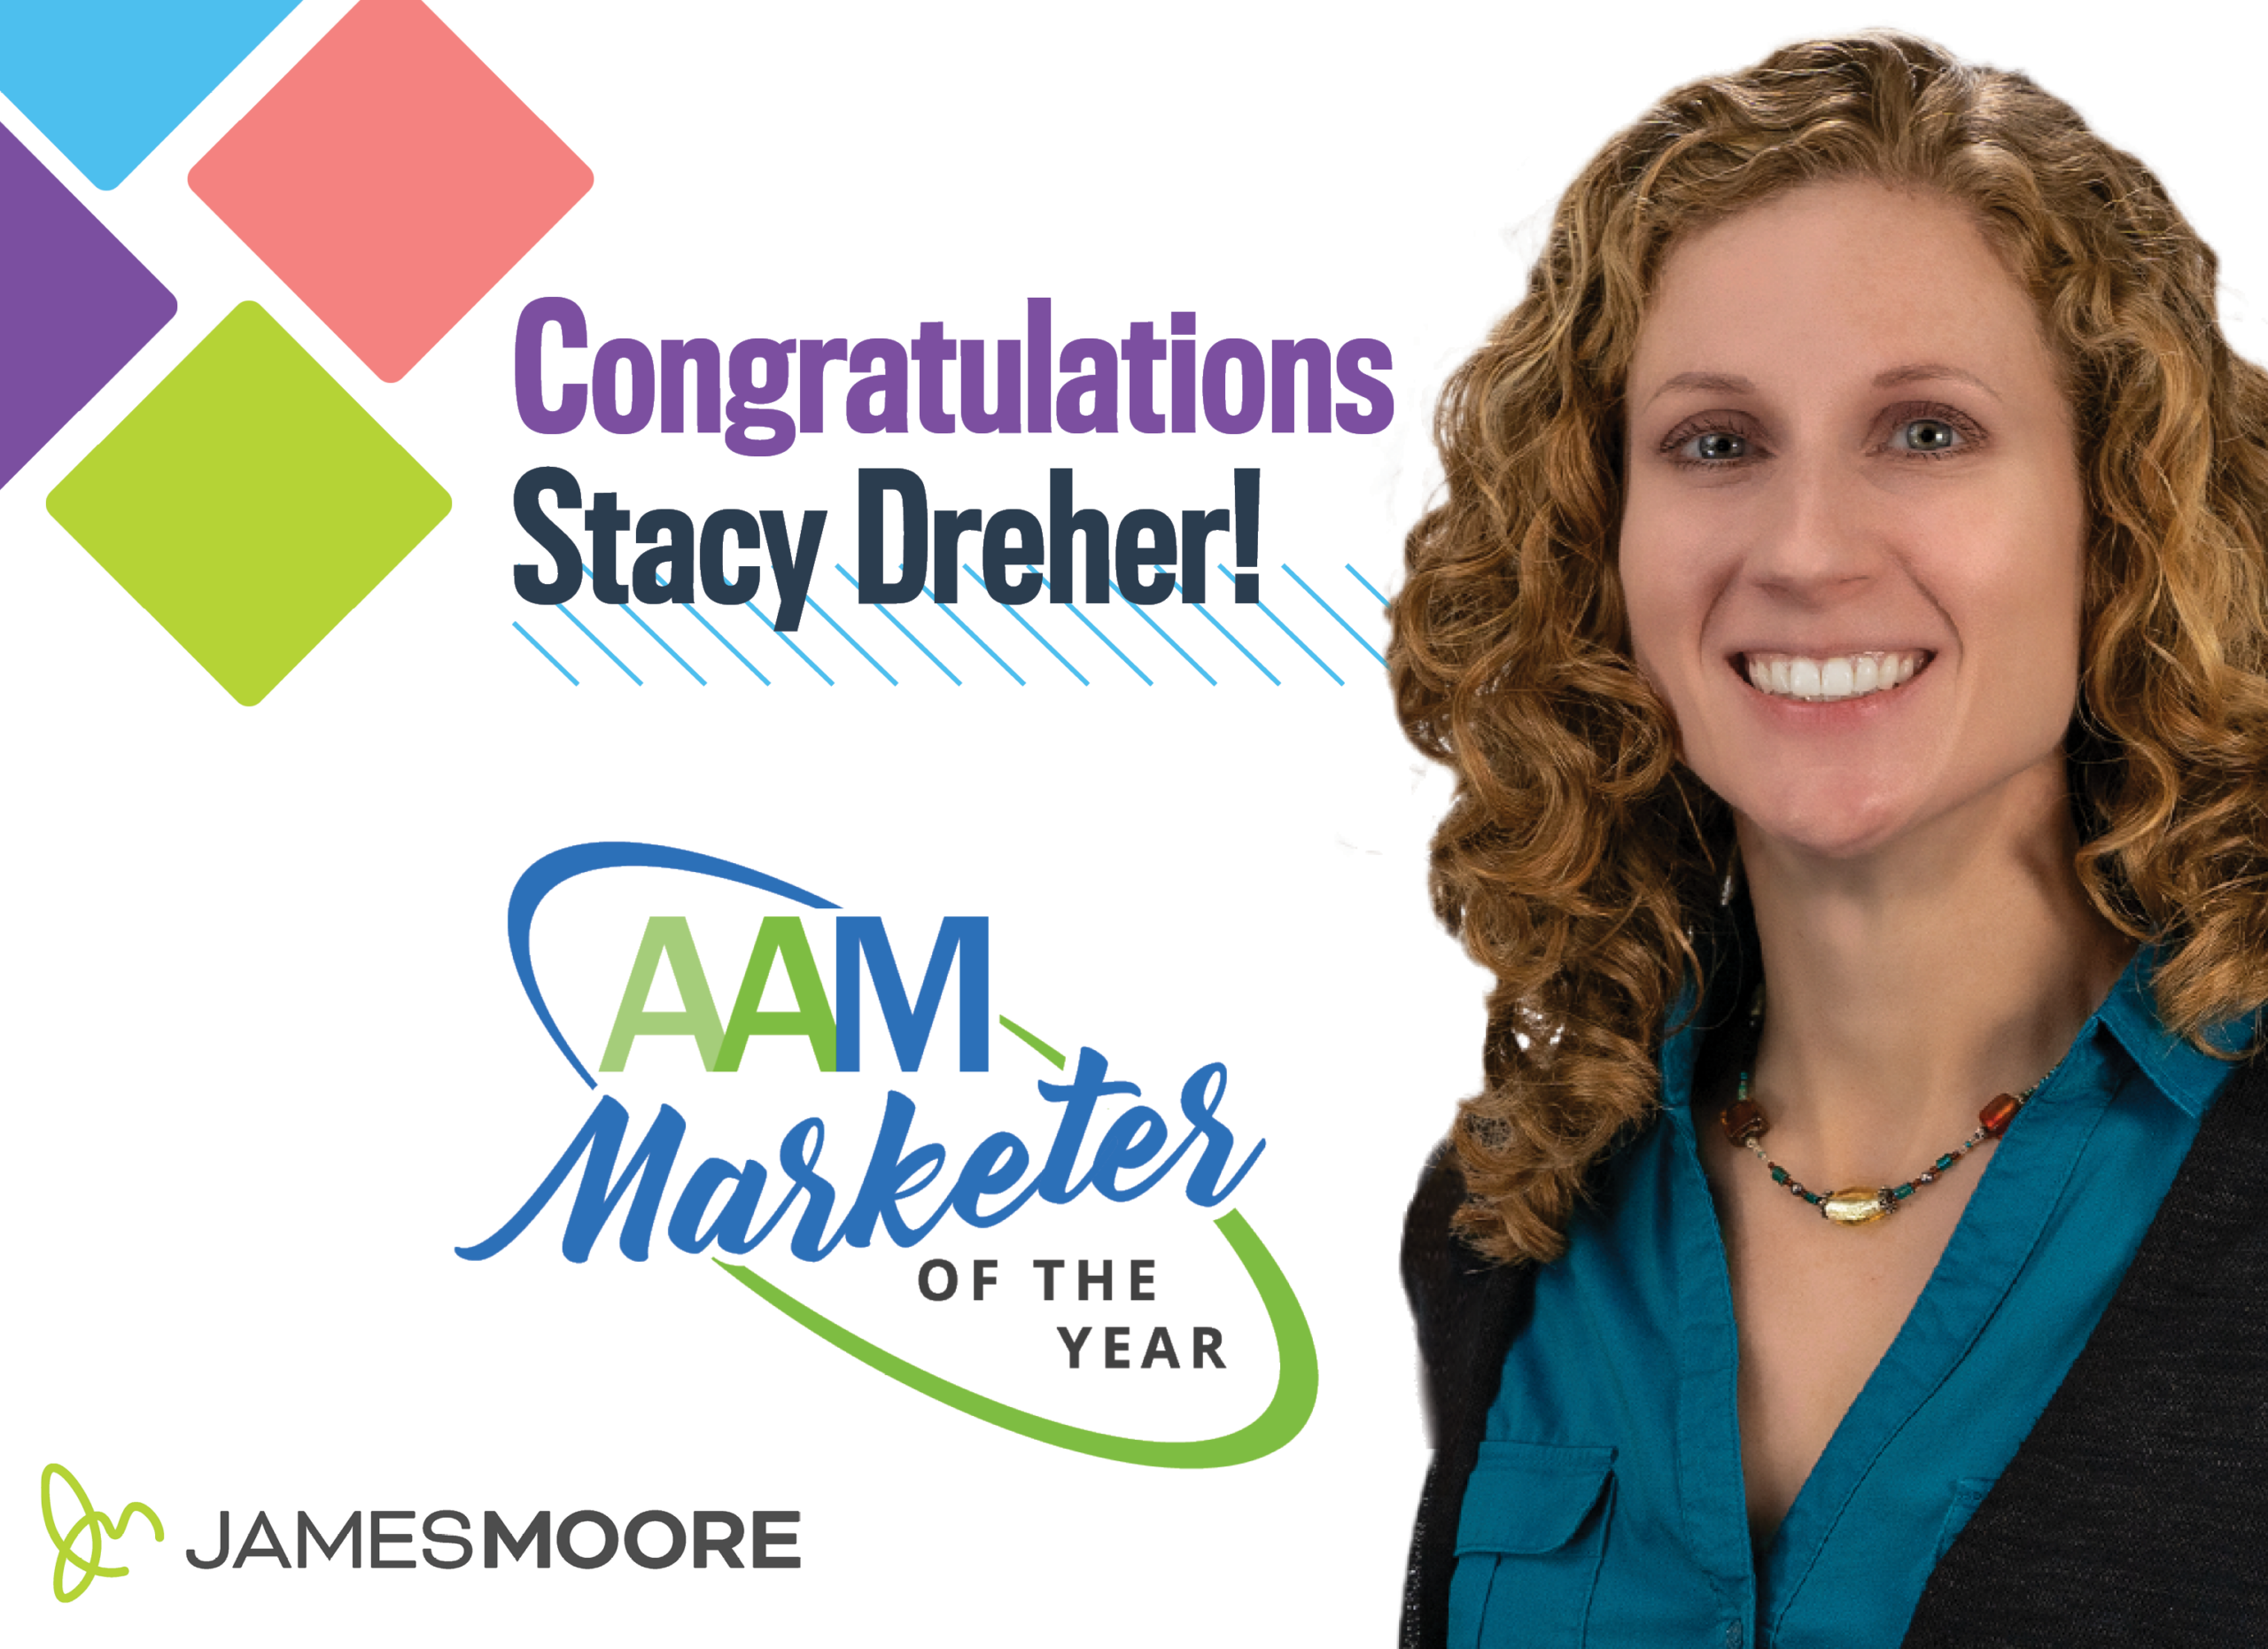 Graphical image announcing Stacy Dreher as the AAM Marketer of the Year 2024 -square version.